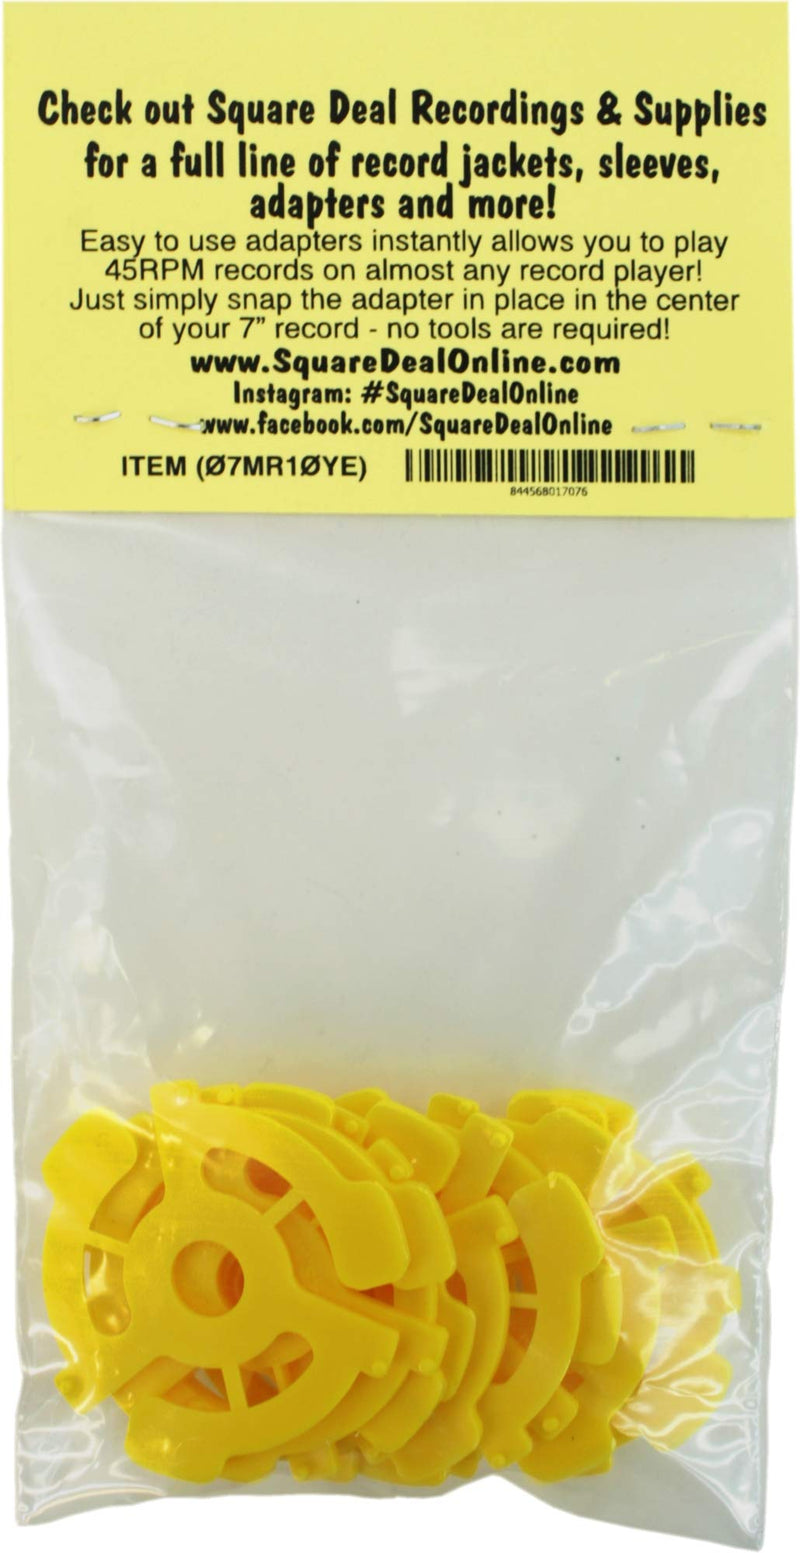 [AUSTRALIA] - (10) Flat Yellow Plastic Record Adapters - Snap in Inserts to Make 7" 45rpm Records Fit on Standard Vinyl Record Turntables #07MR10YE 